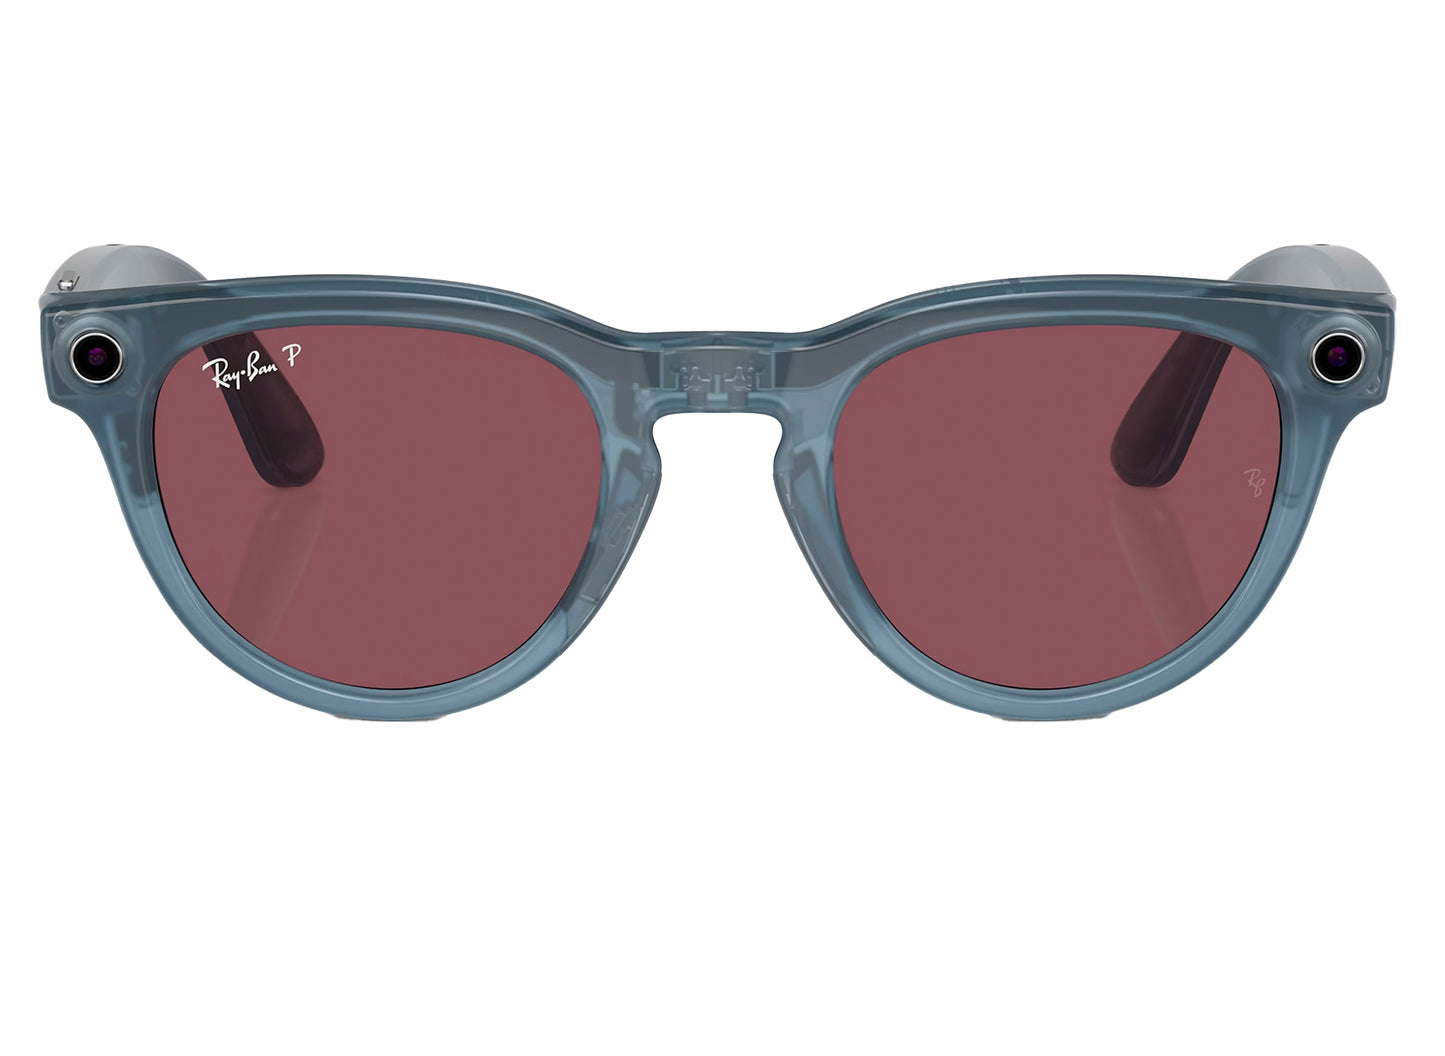 Ray-Ban Meta Headliner in Shiny Jeans Blue w/ Polarized Dusty Red Lenses xld